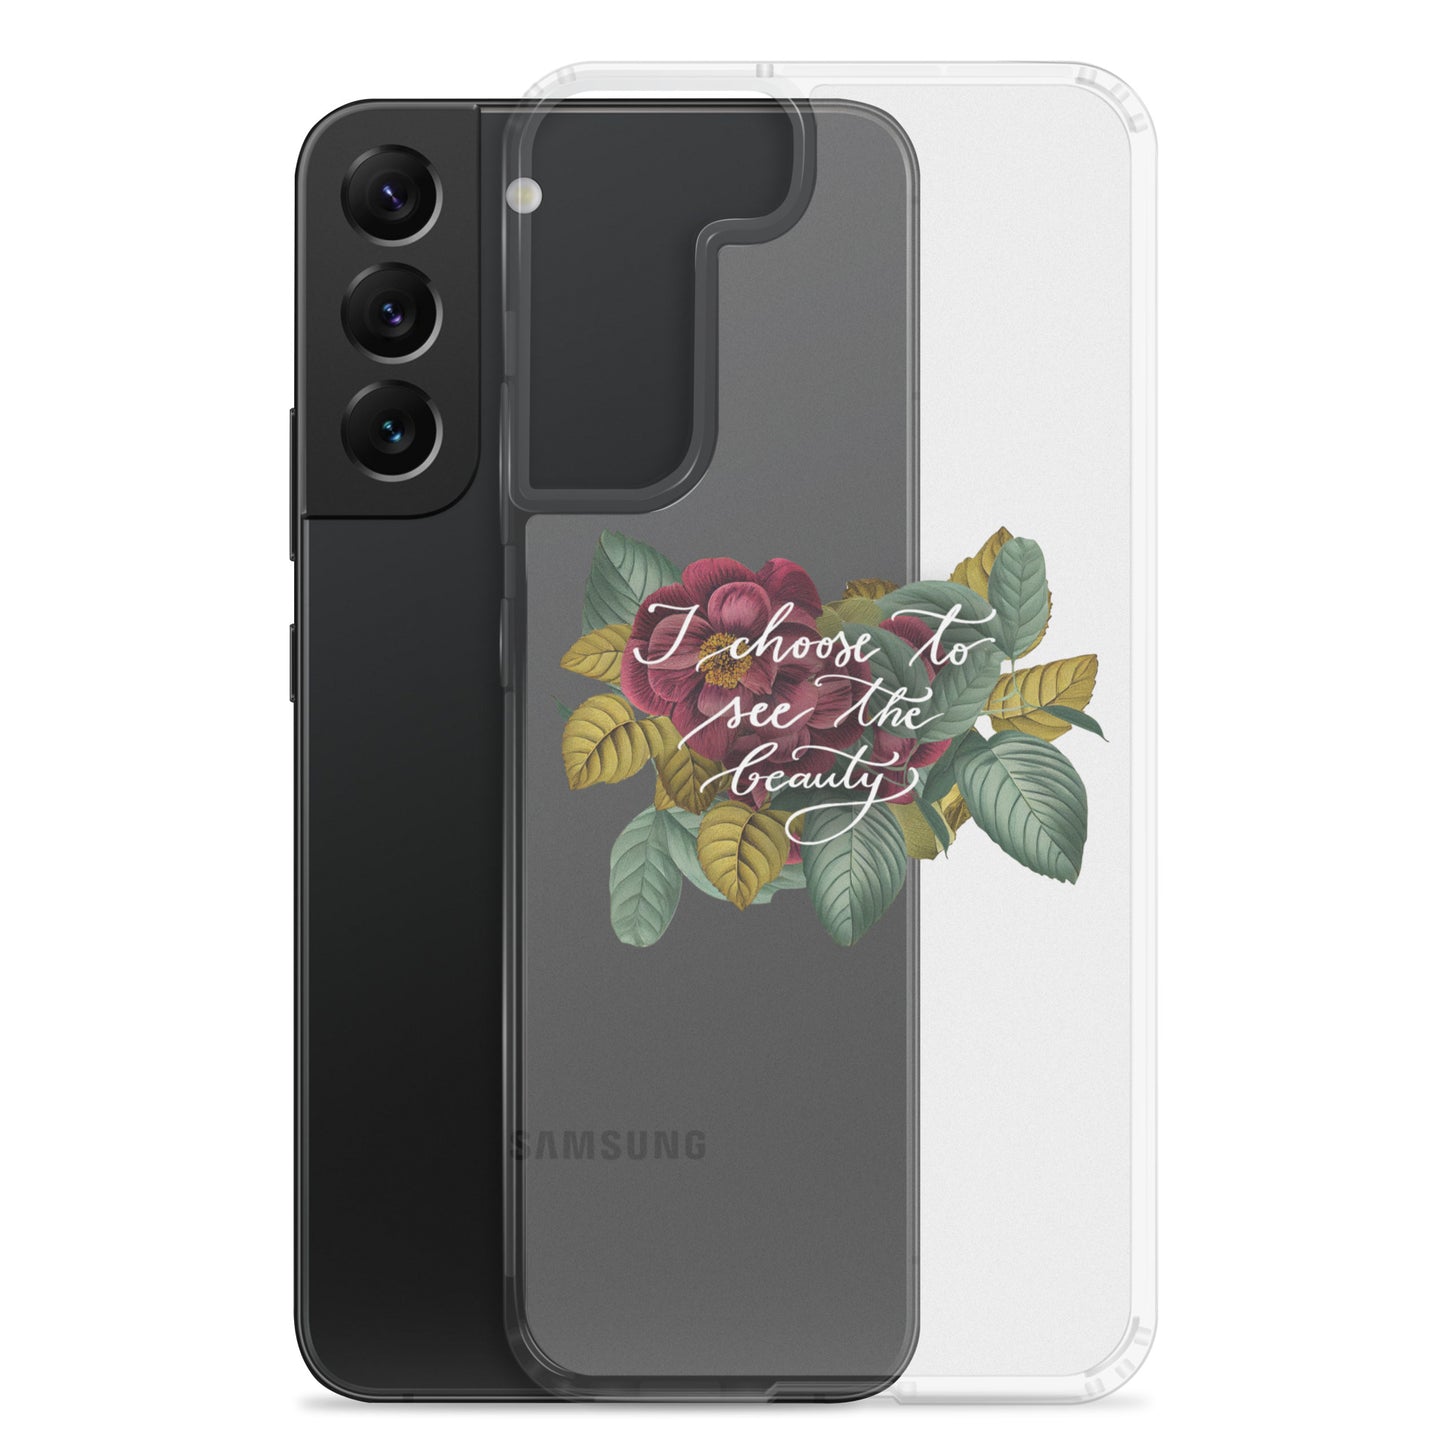 Clear Case for Samsung® "I choose to see the beauty - vintage flowers"